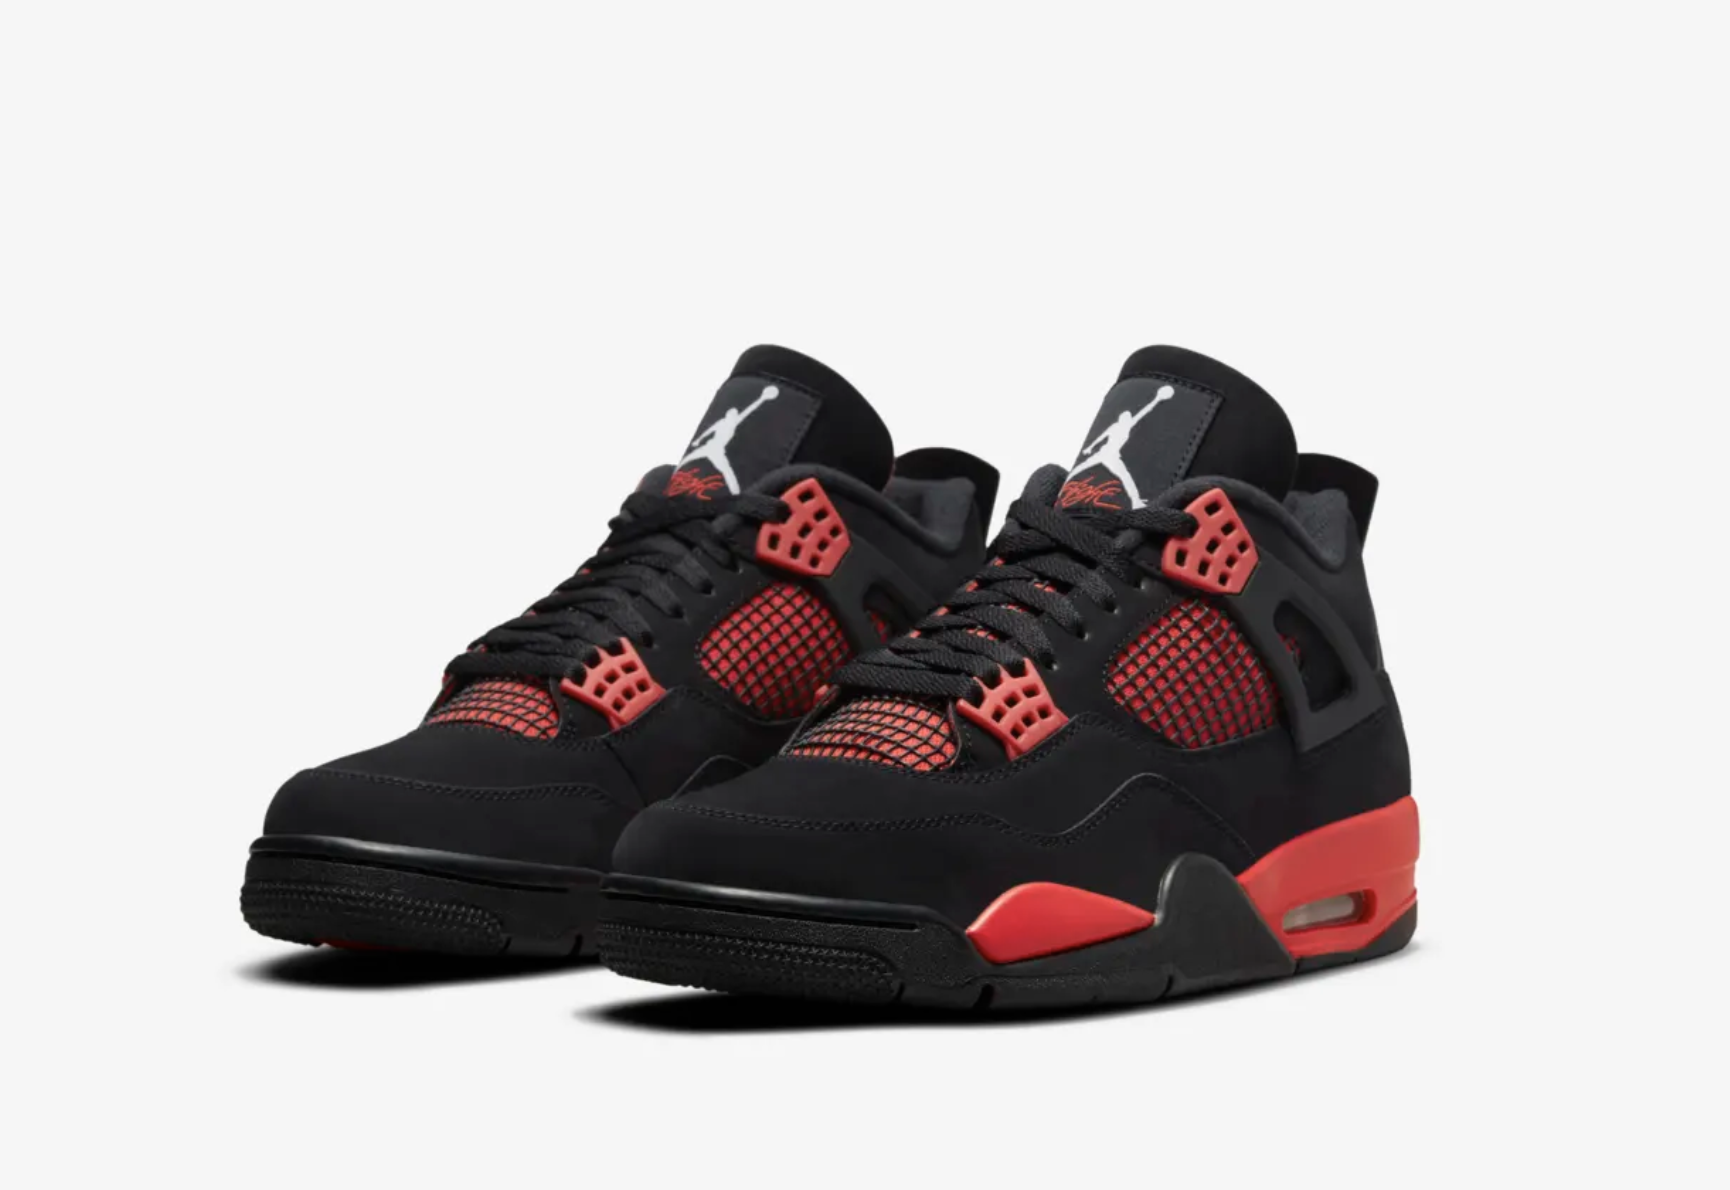 Twitter Reacts To Air Jordan 4 'Crimson' Launch On The SNKRS App